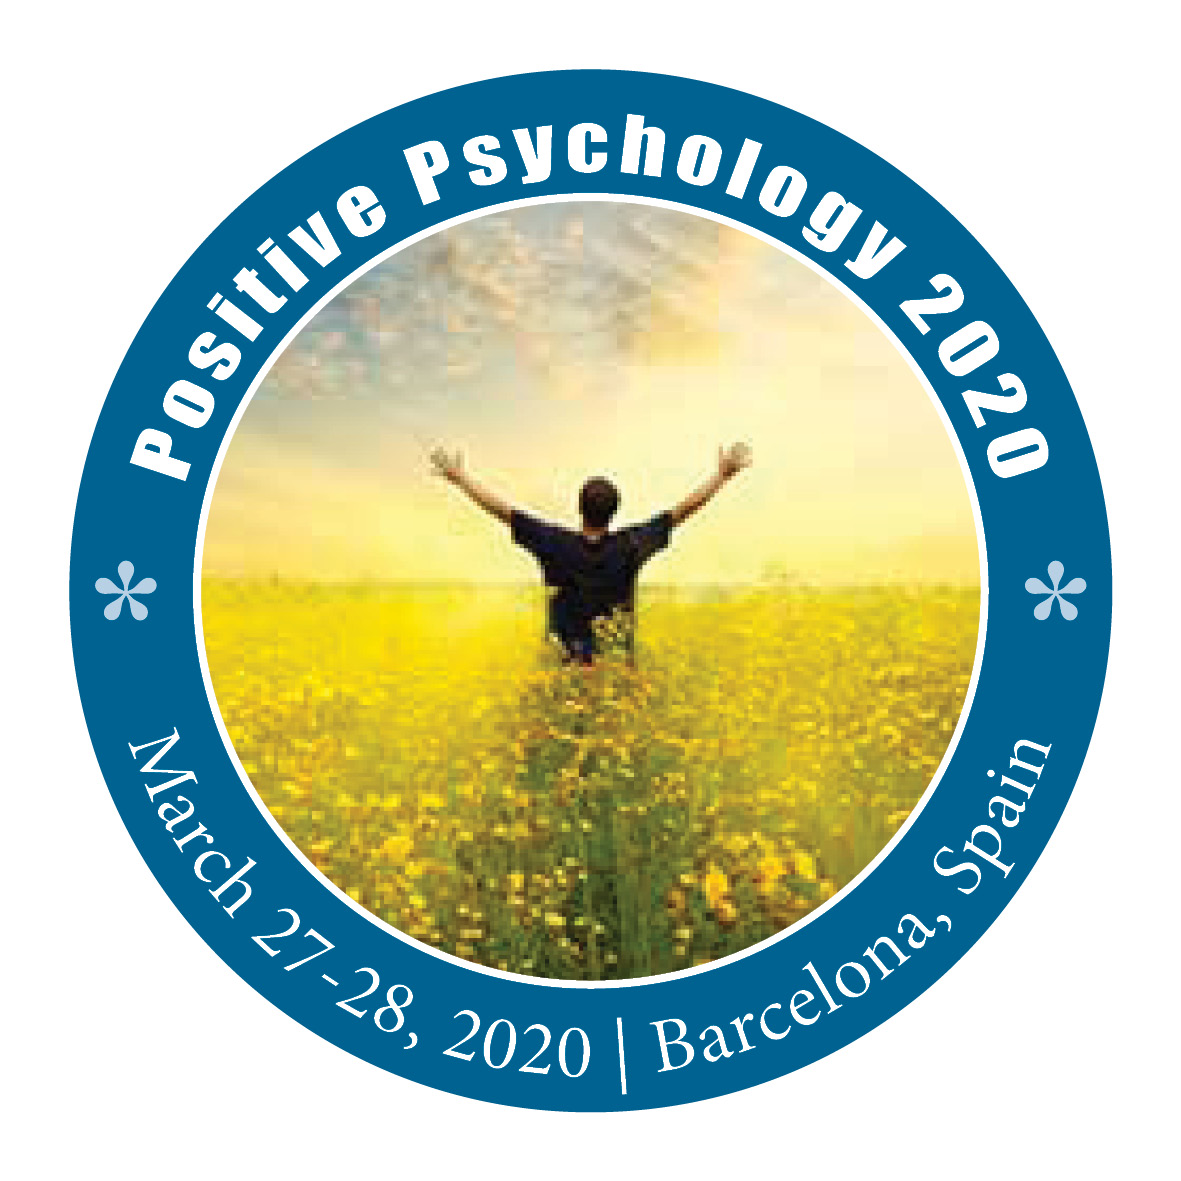 31st World Summit on Positive Psychology, Mindfulness, Psychotherapy and Social Sciences, [Happiness Event] March 27-28, 2020 Barcelona, Spain., Barcelona, Cataluna, Spain